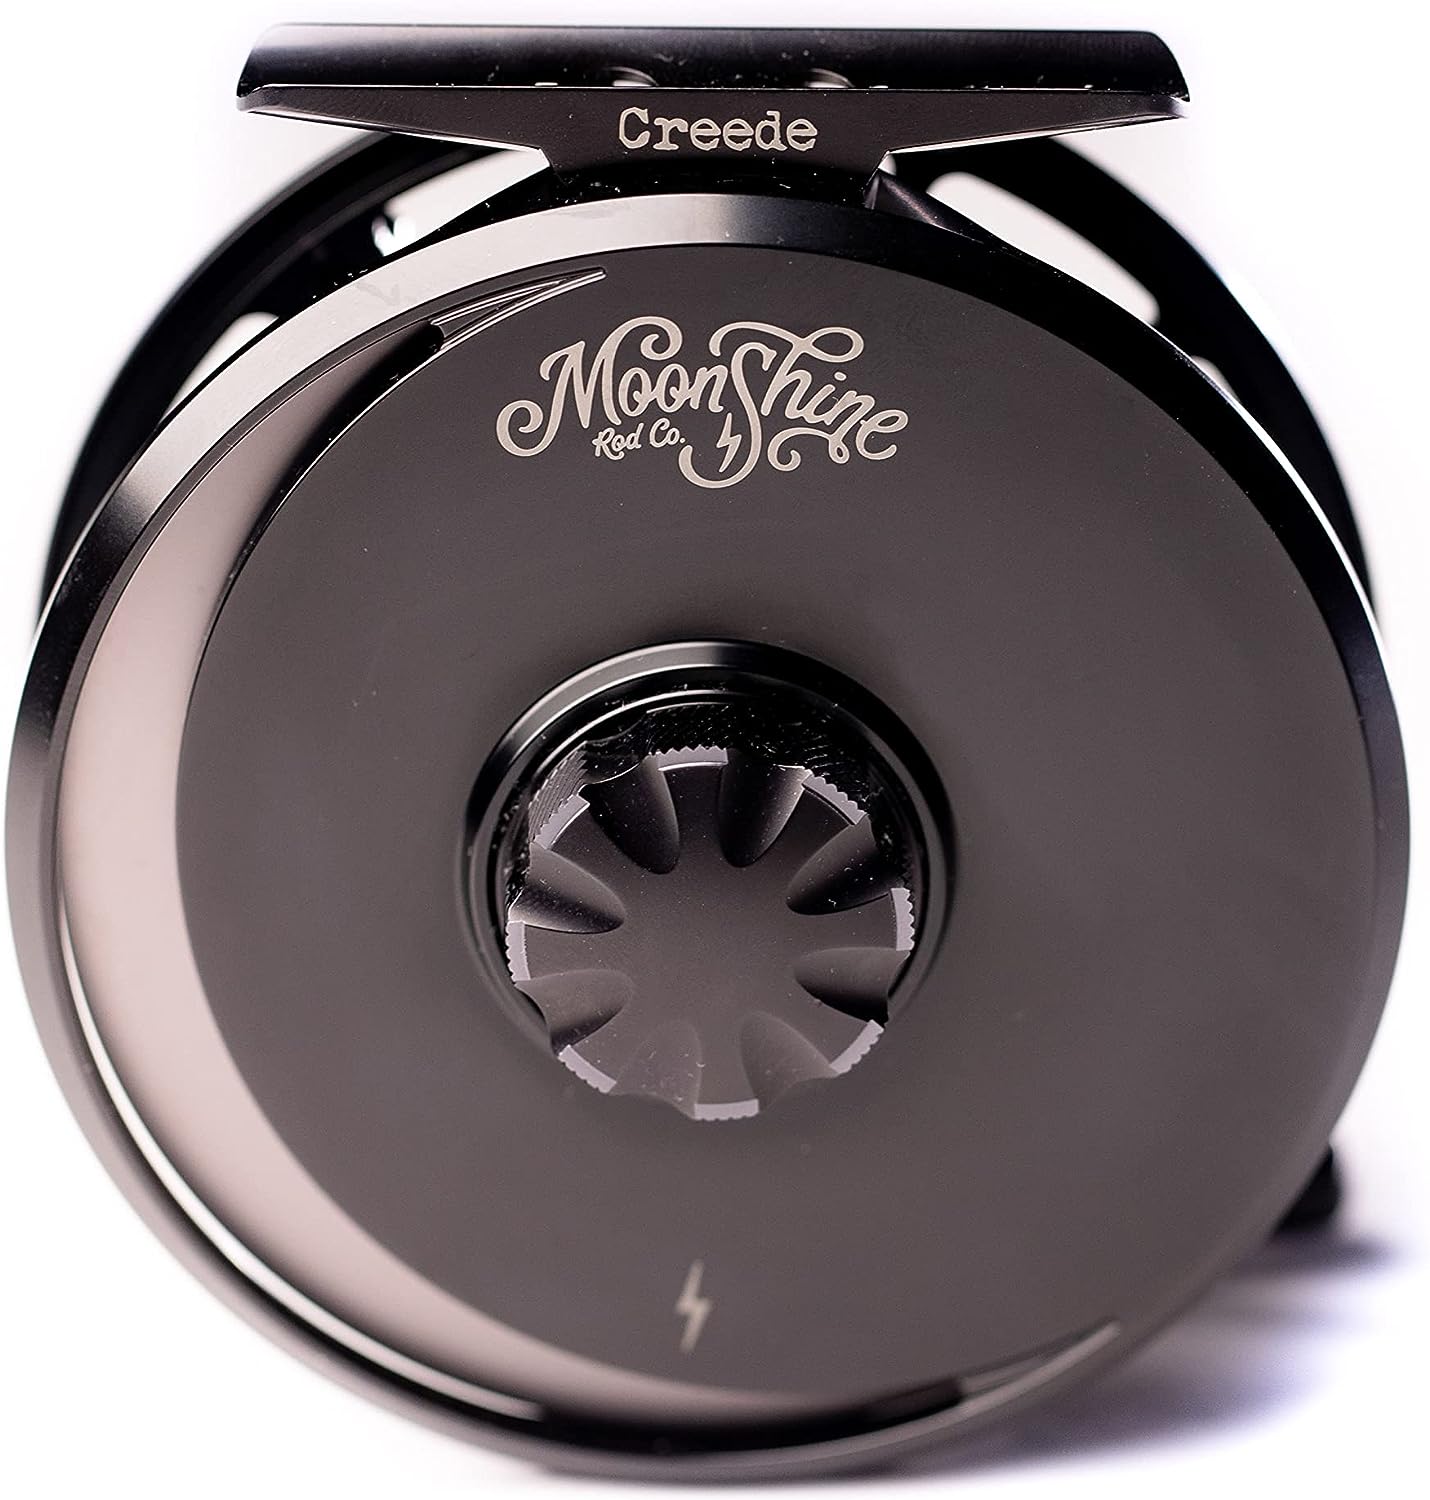 https://tu420.com/wp-content/uploads/2023/11/moonshine-rod-co-the-creede-fly-fishing-reel-review.jpg